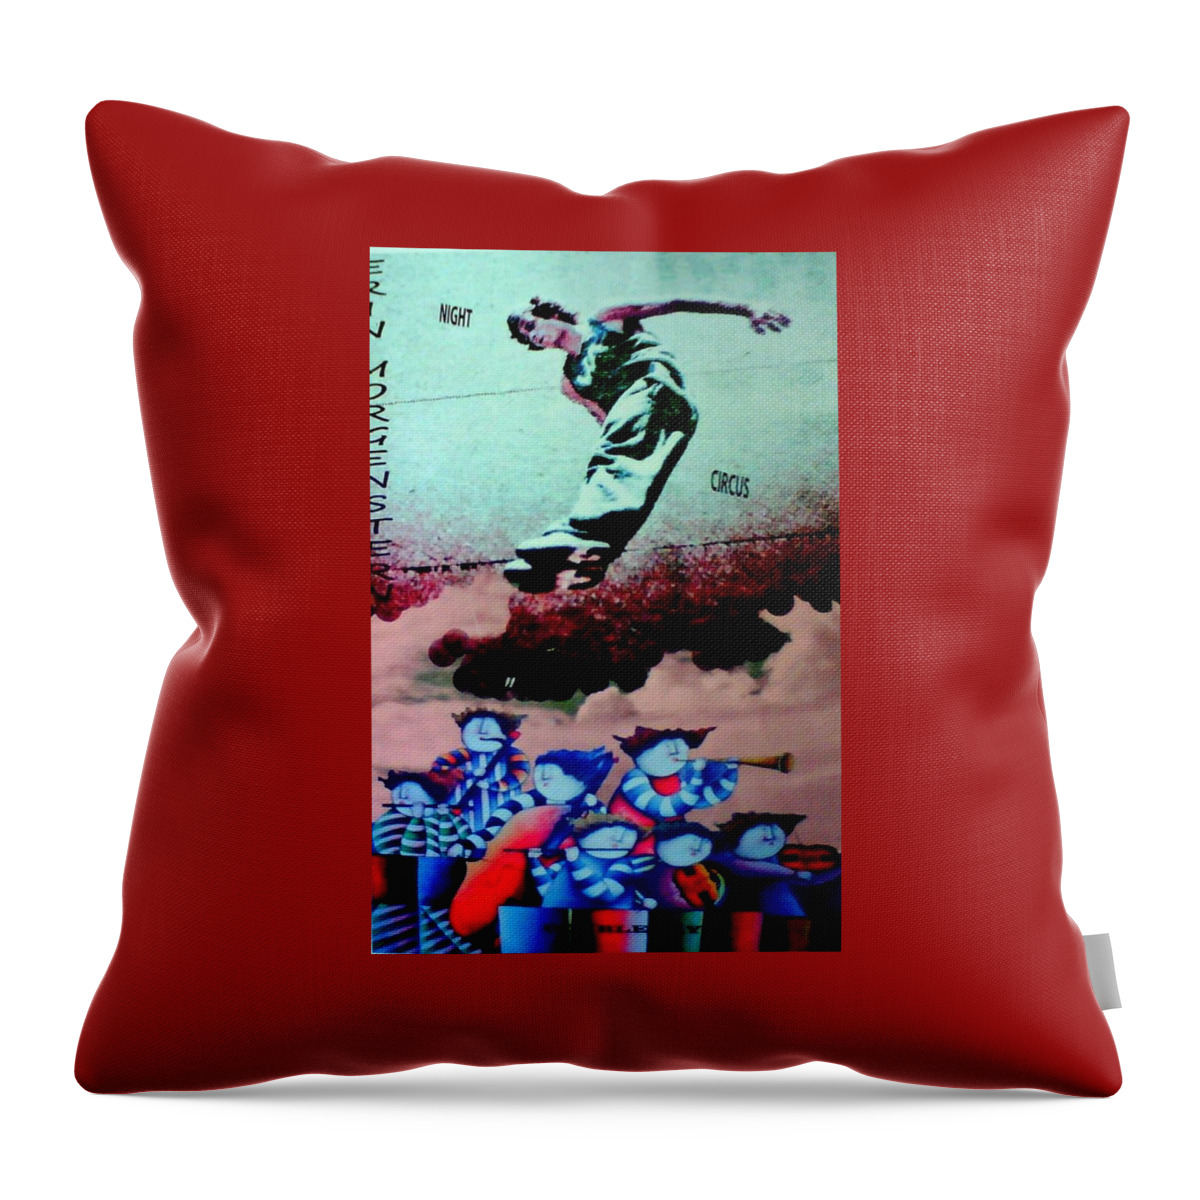 Musicians Throw Pillow featuring the digital art Clown Circus by Suzanne Berthier